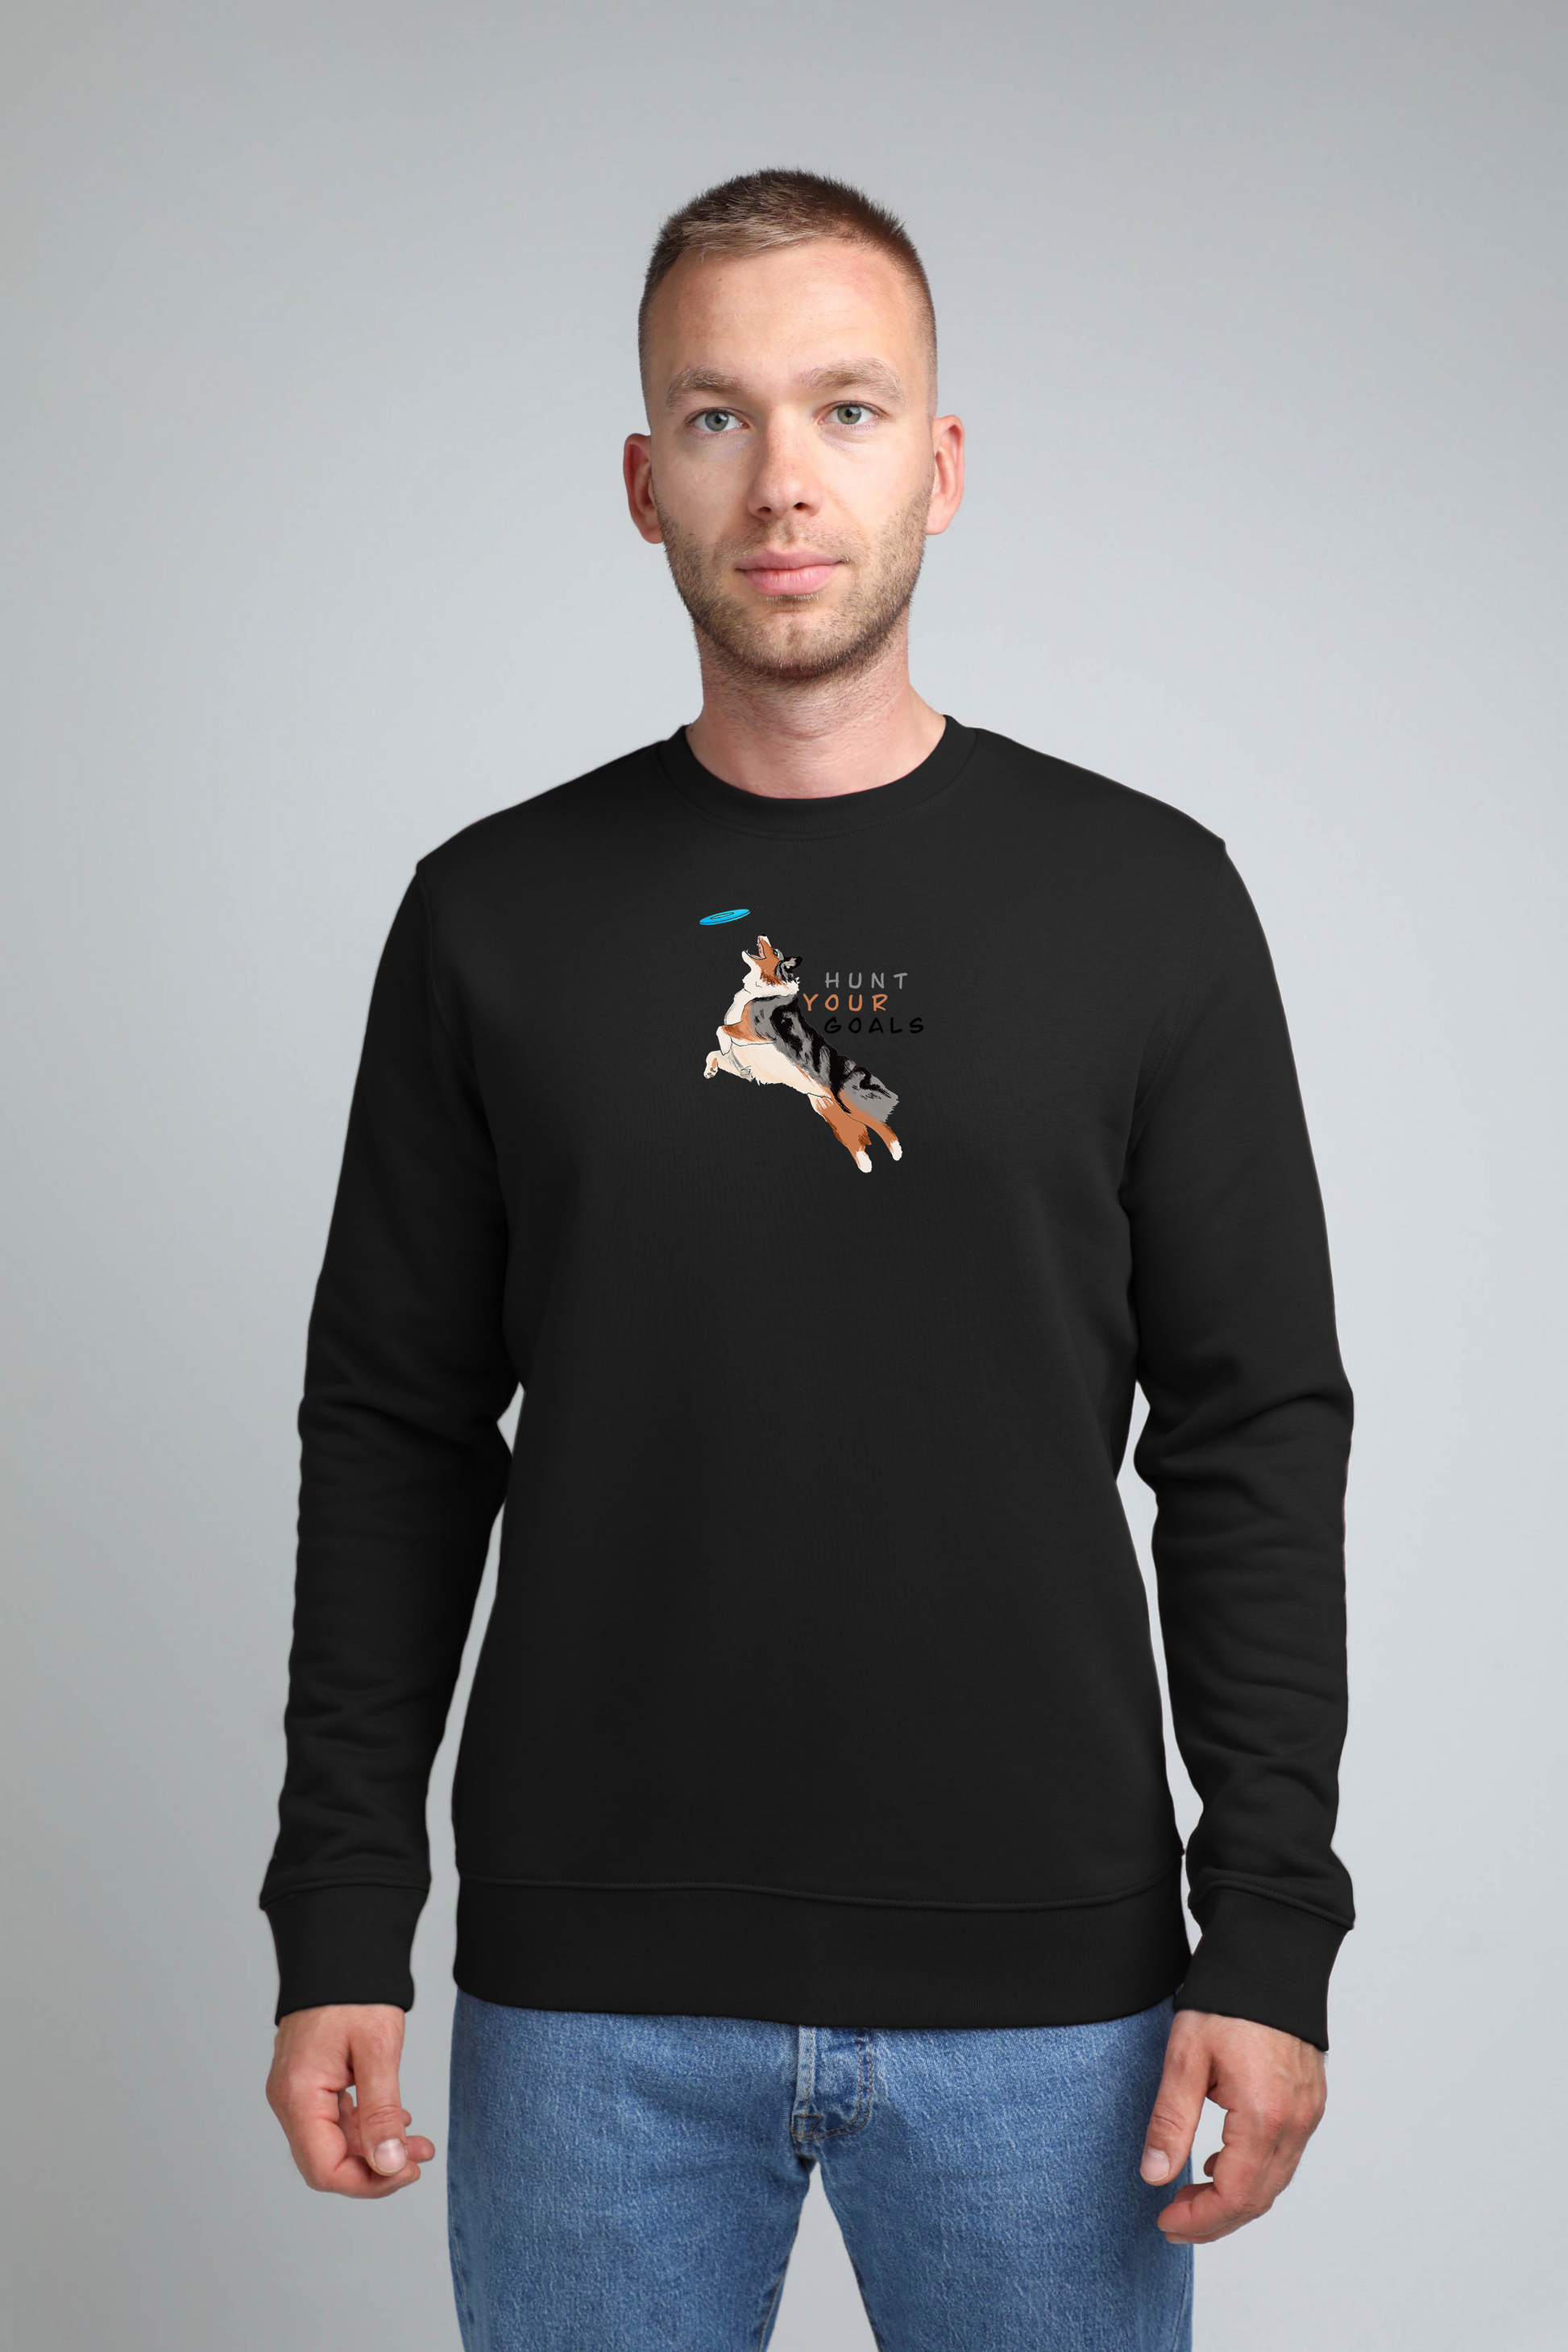 Hunt your goals | Crew neck sweatshirt with dog. Regular fit | Unisex by My Wild Other